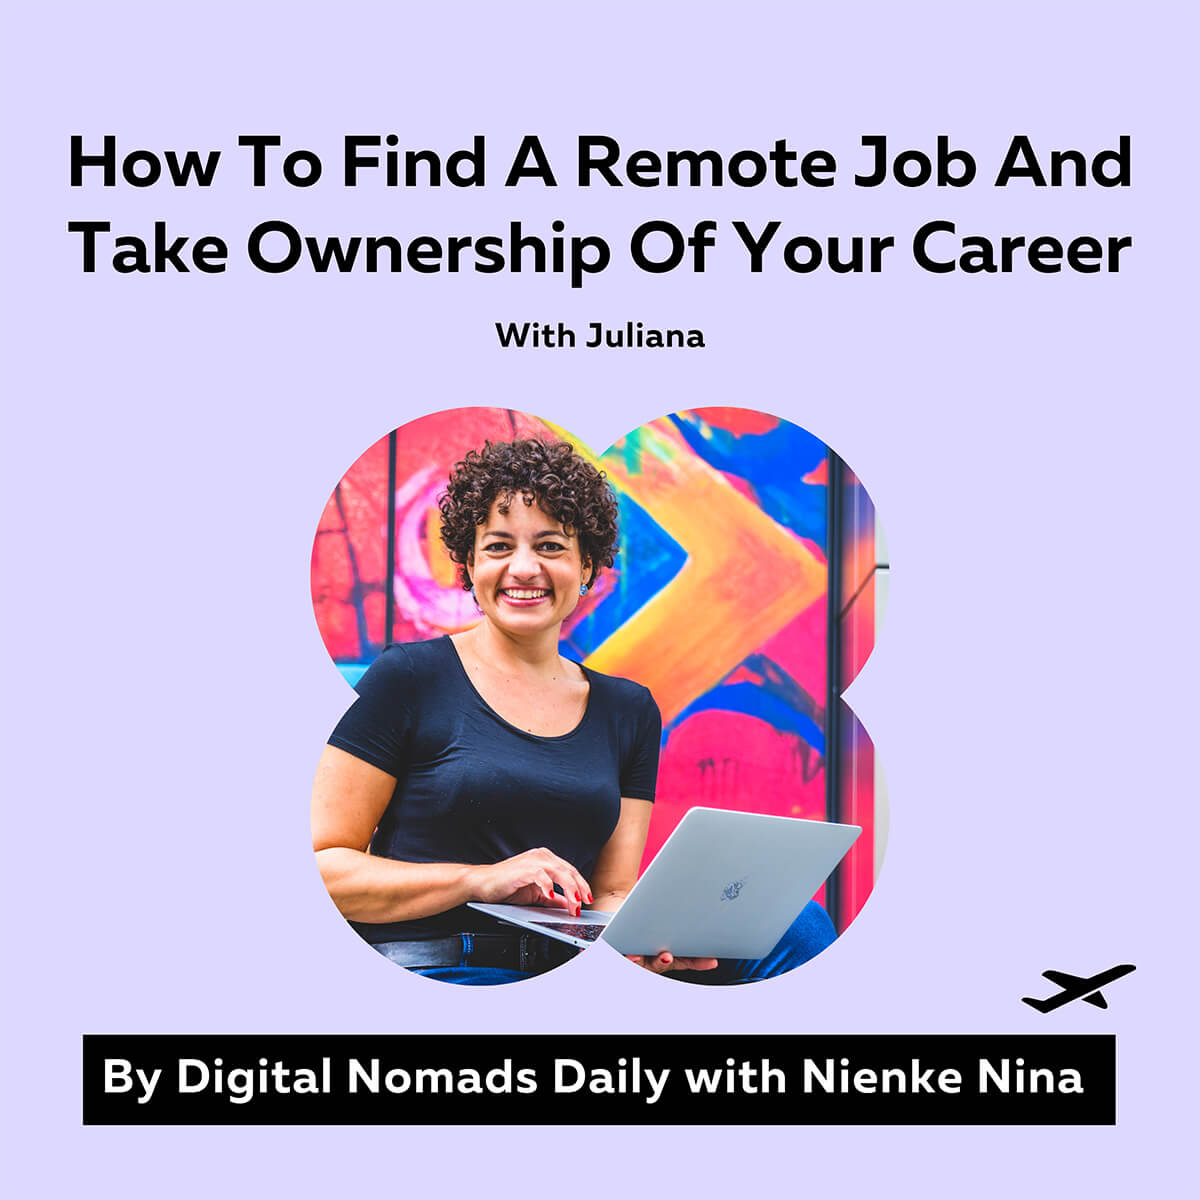 Digital Nomads Daily Podcast Cover Episode 37 How To Find A Remote Job And Take Ownership Of Your Career With Digital Nomad Juliana Rabbi (1)